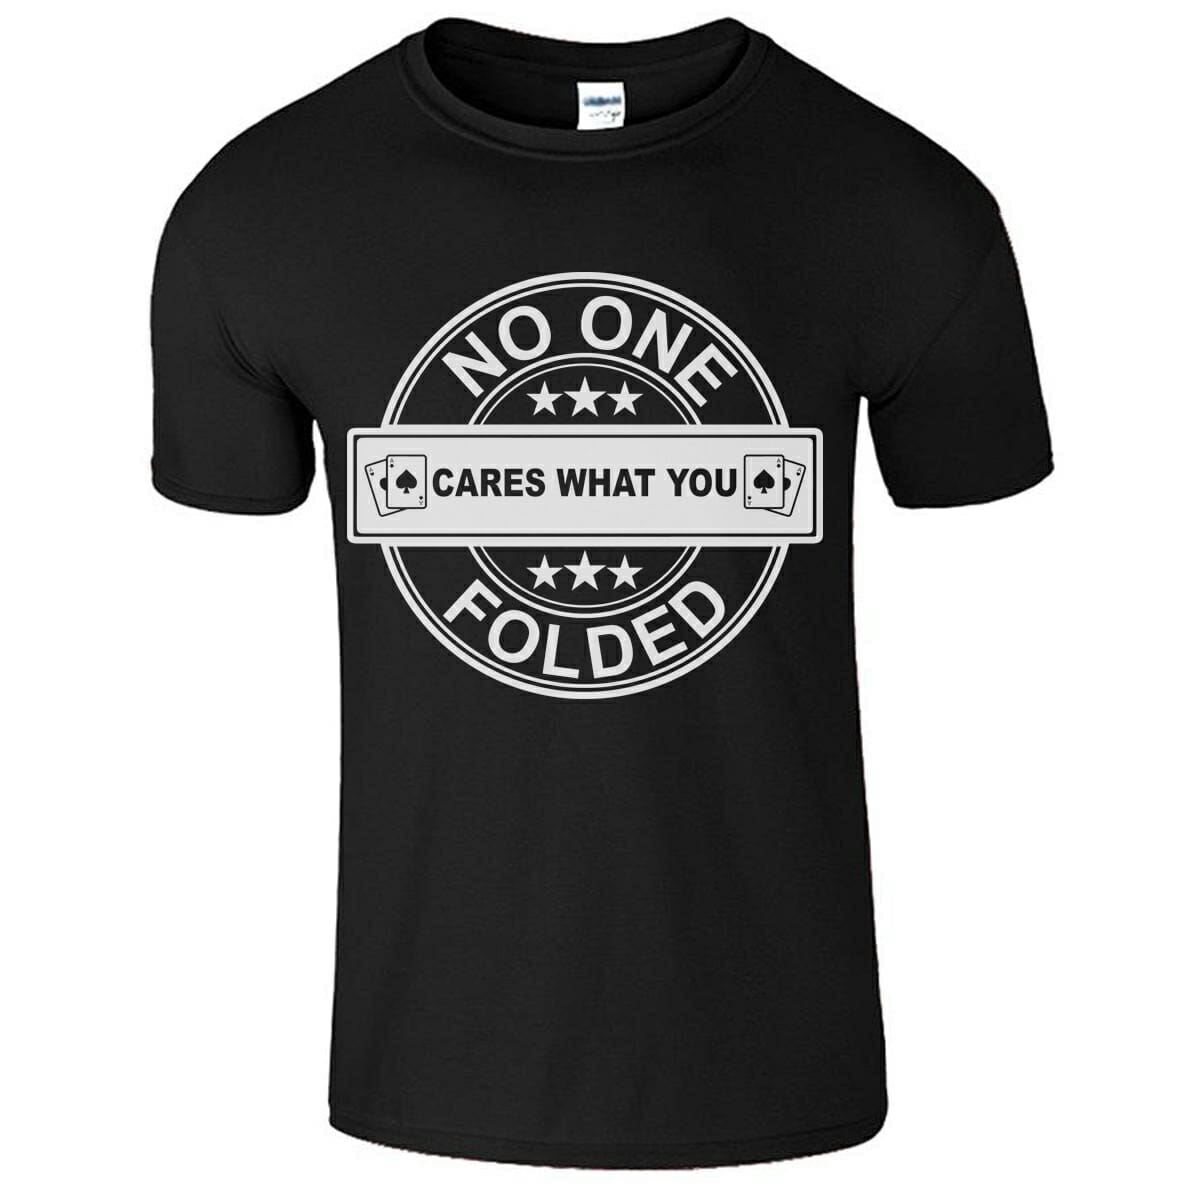 No One Care What You Folded Funny T-Shirt Design For Gamblers